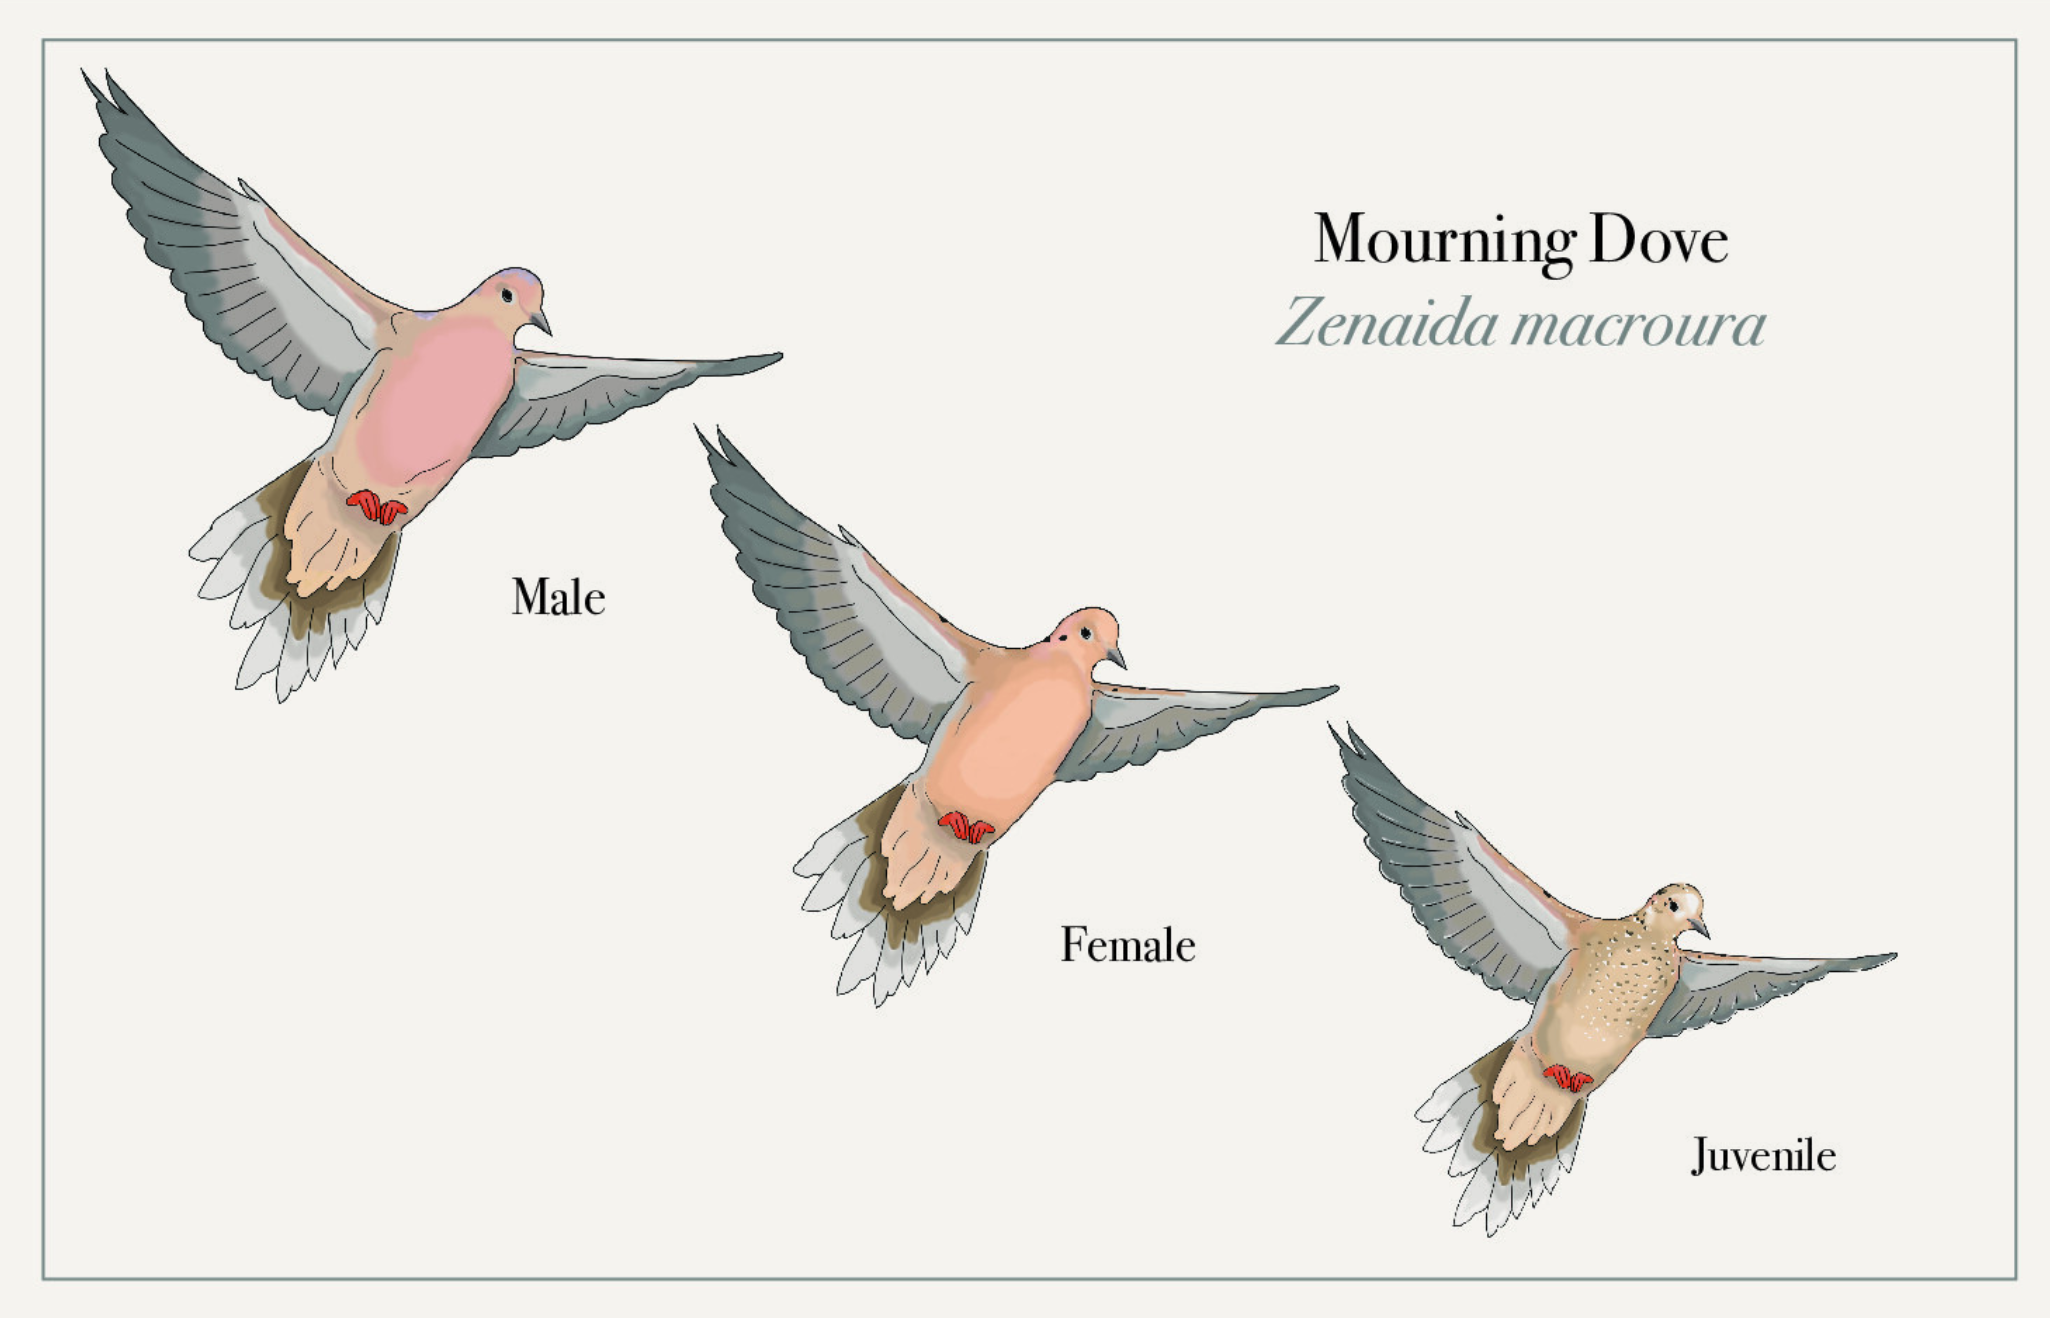 Micah's illustrations of Mourning Doves.